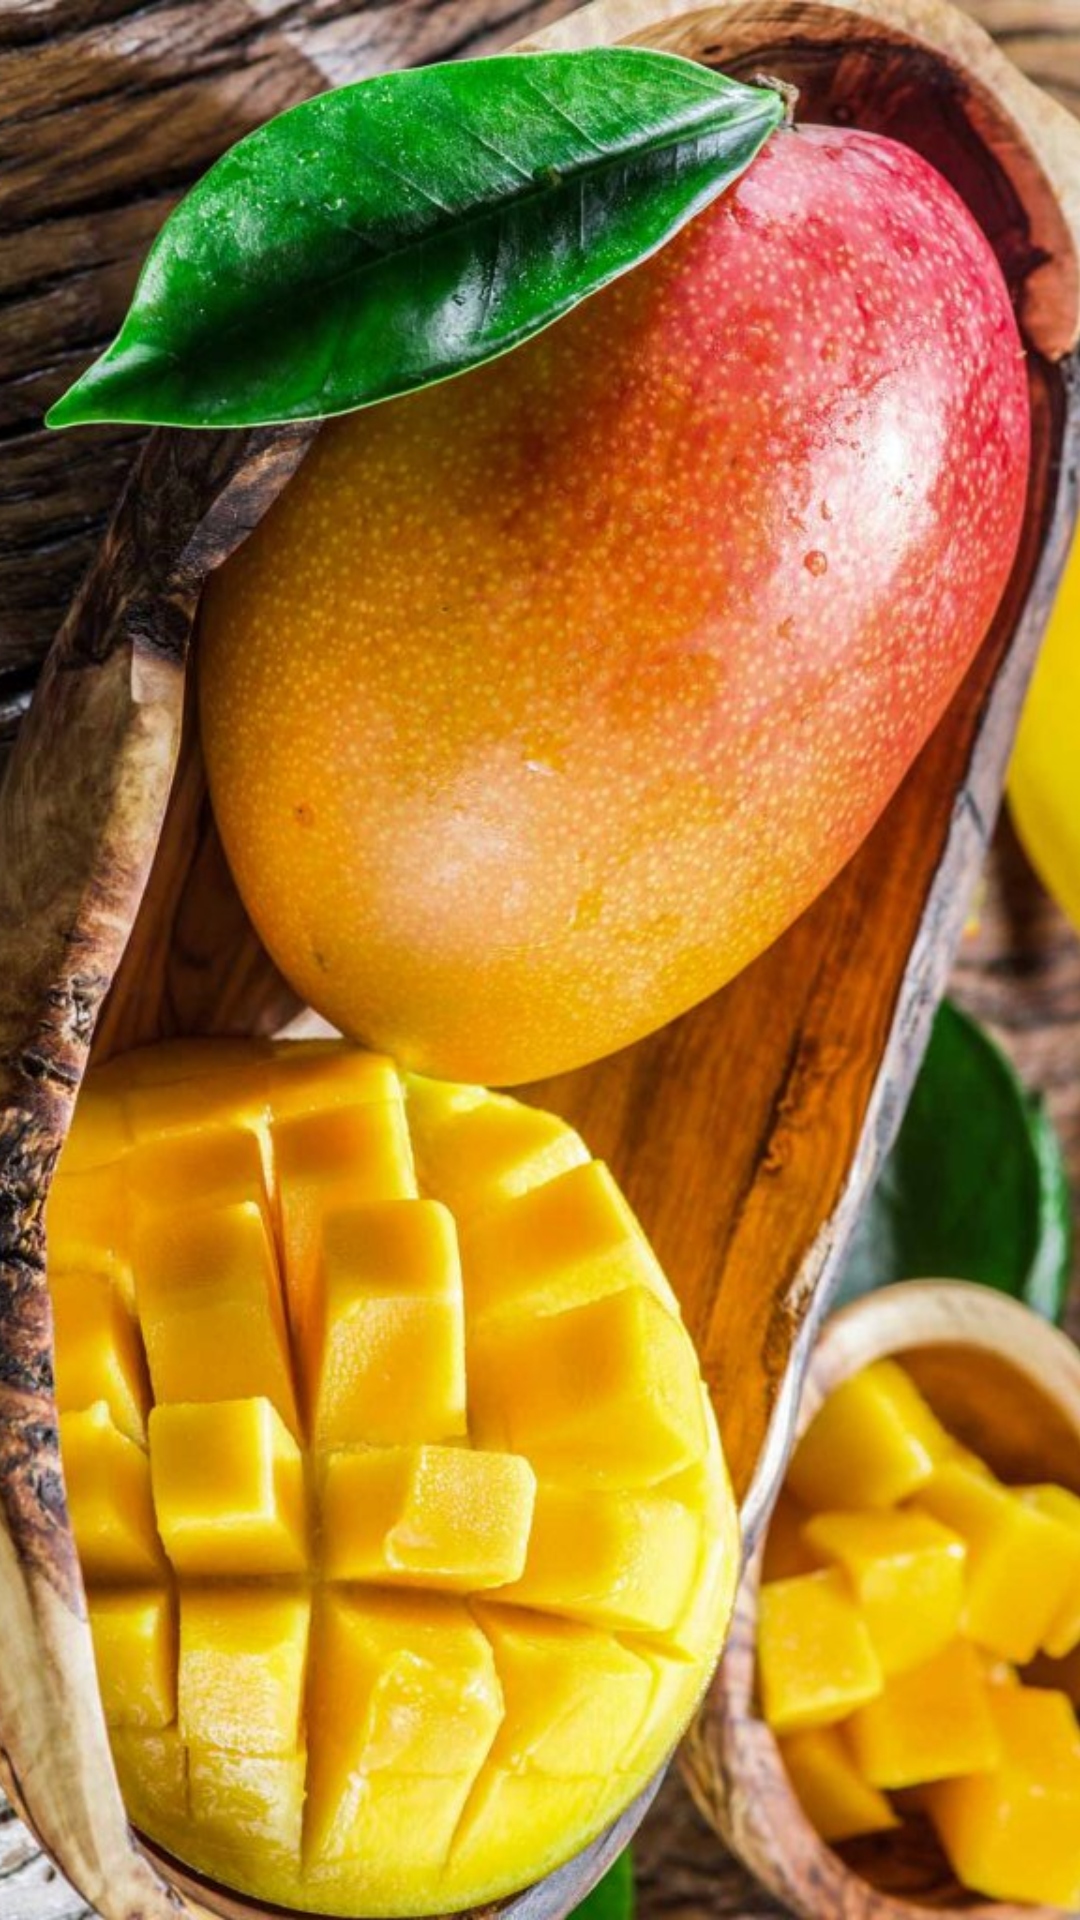 5 mouthwatering mango varieties to savour in India